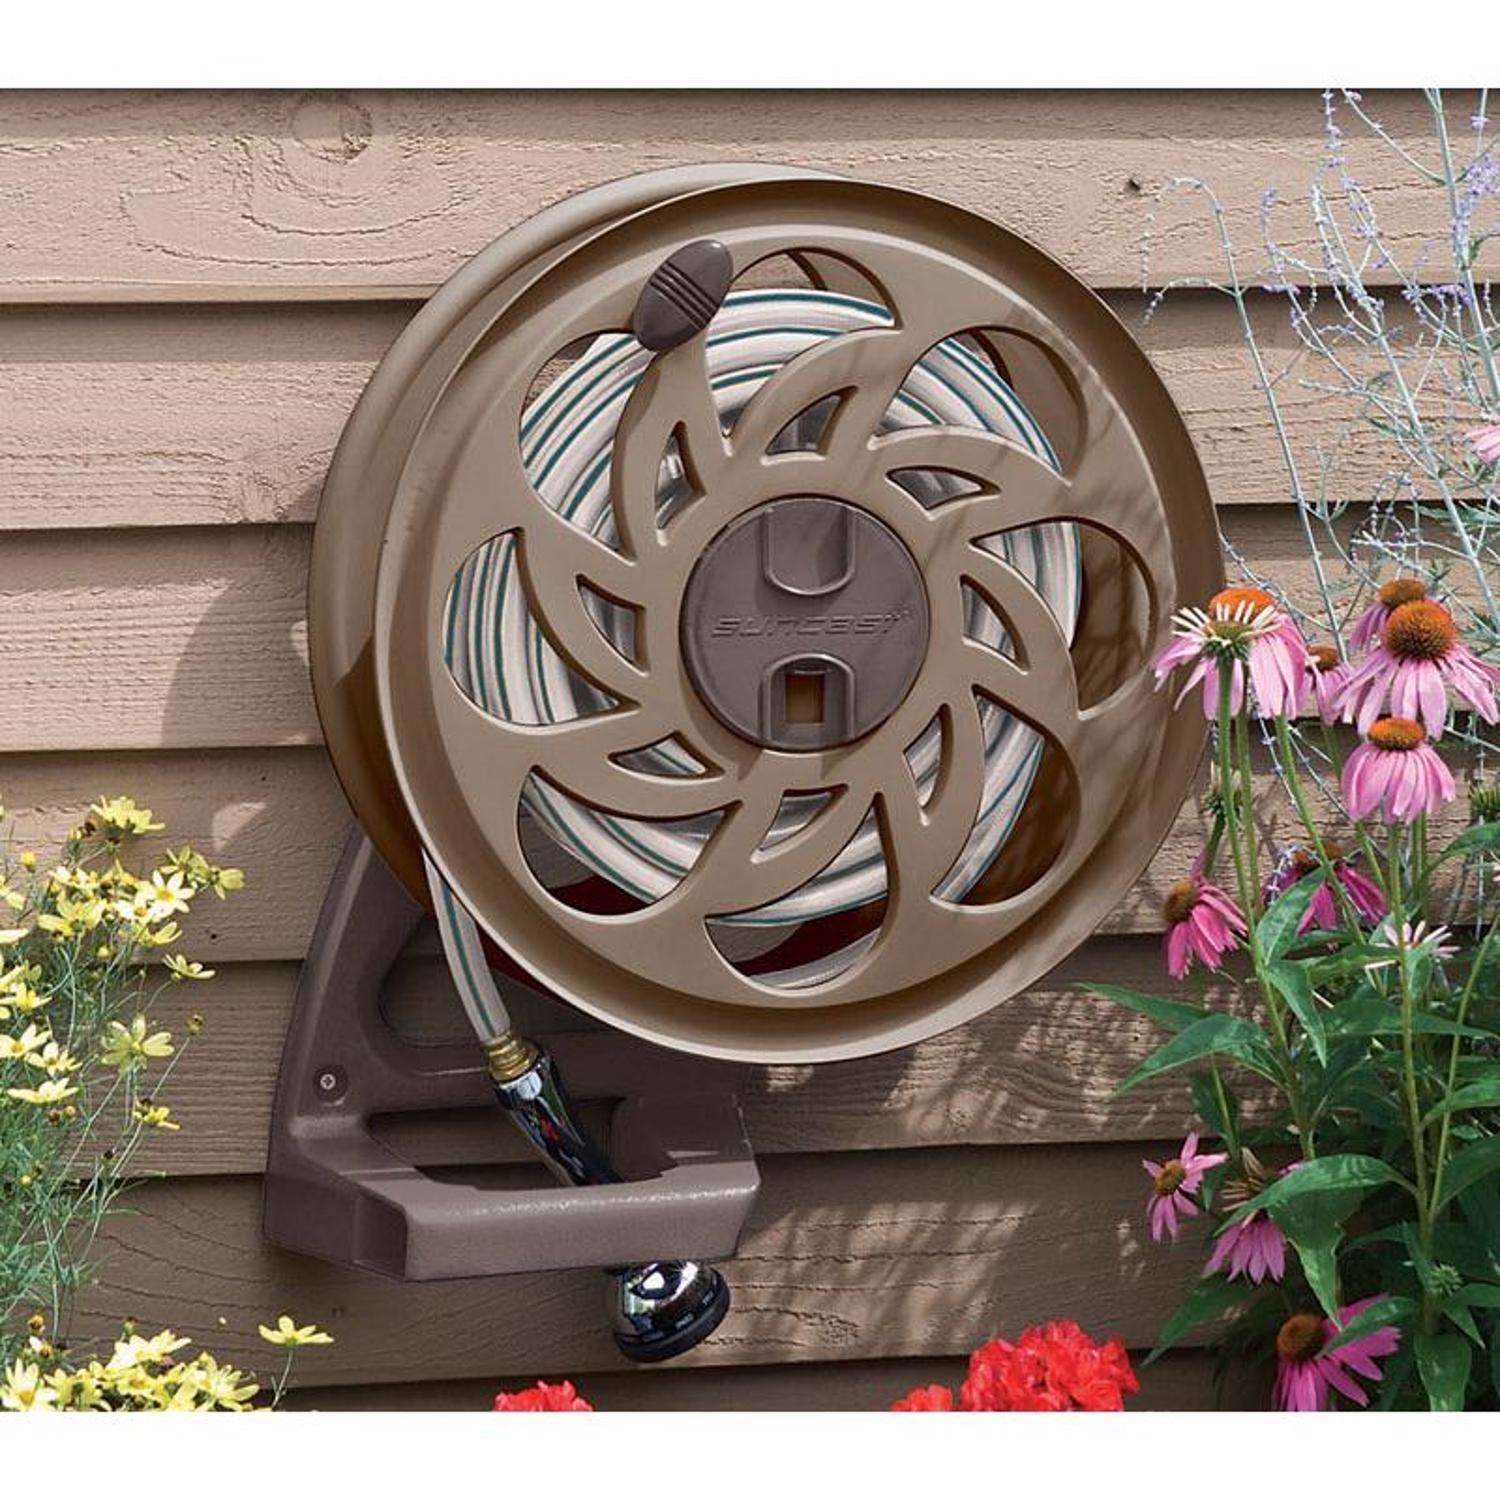 Garden Hose Reel Cart Small,Outdoor Portable Car Wash Hose Storage Rack,  Household Mini ABS Hose Cart with Water Gun, Gardening Watering Set (Color  